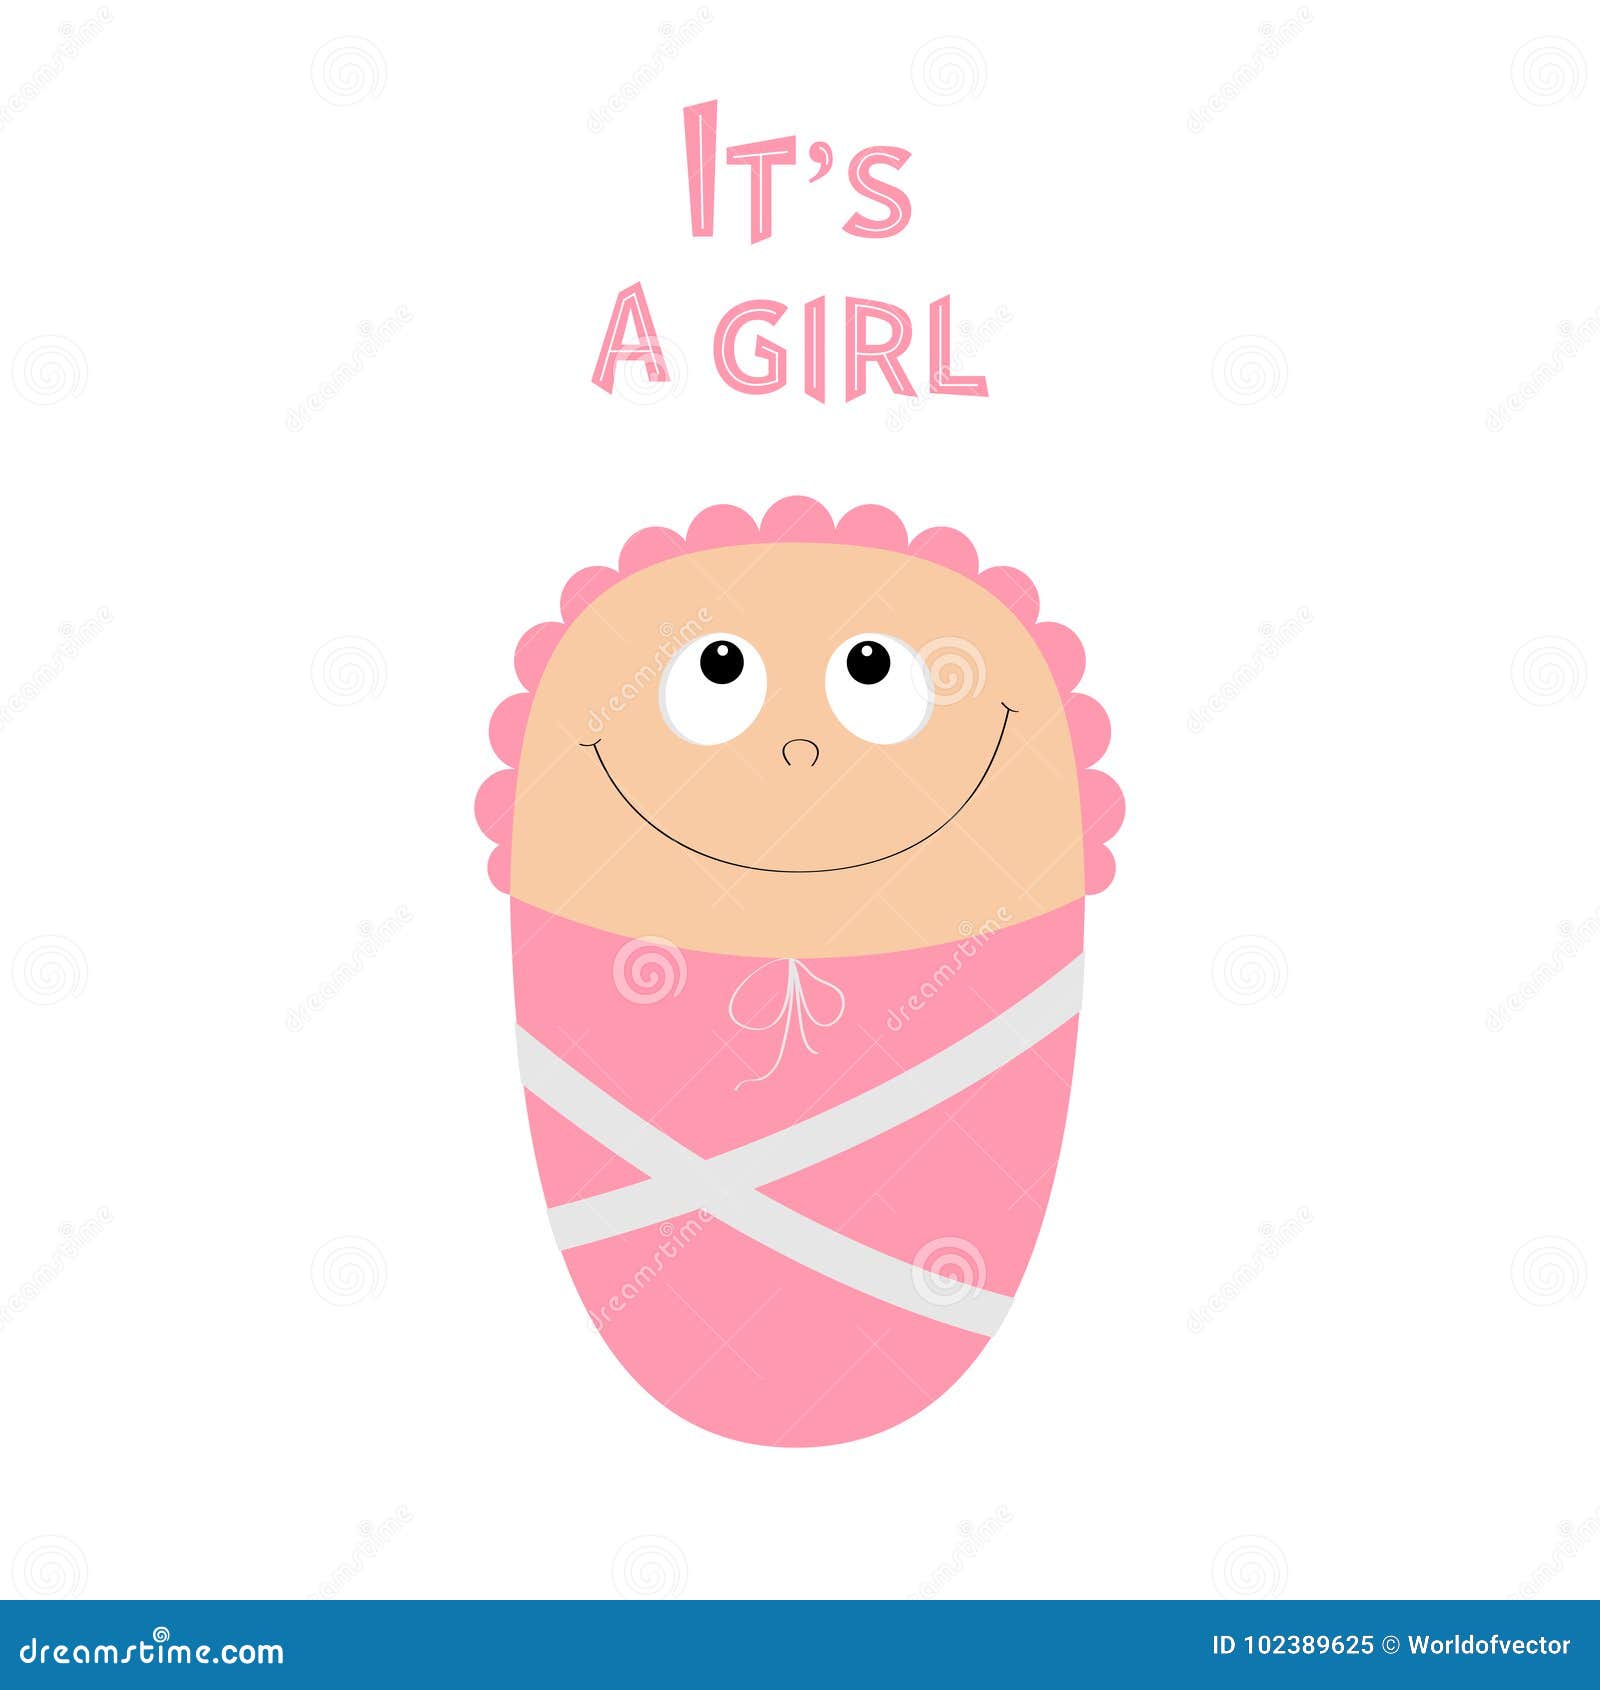 Its Girl Announcement Stock Illustrations – 1,078 Its Girl Announcement  Stock Illustrations, Vectors & Clipart - Dreamstime - Page 4